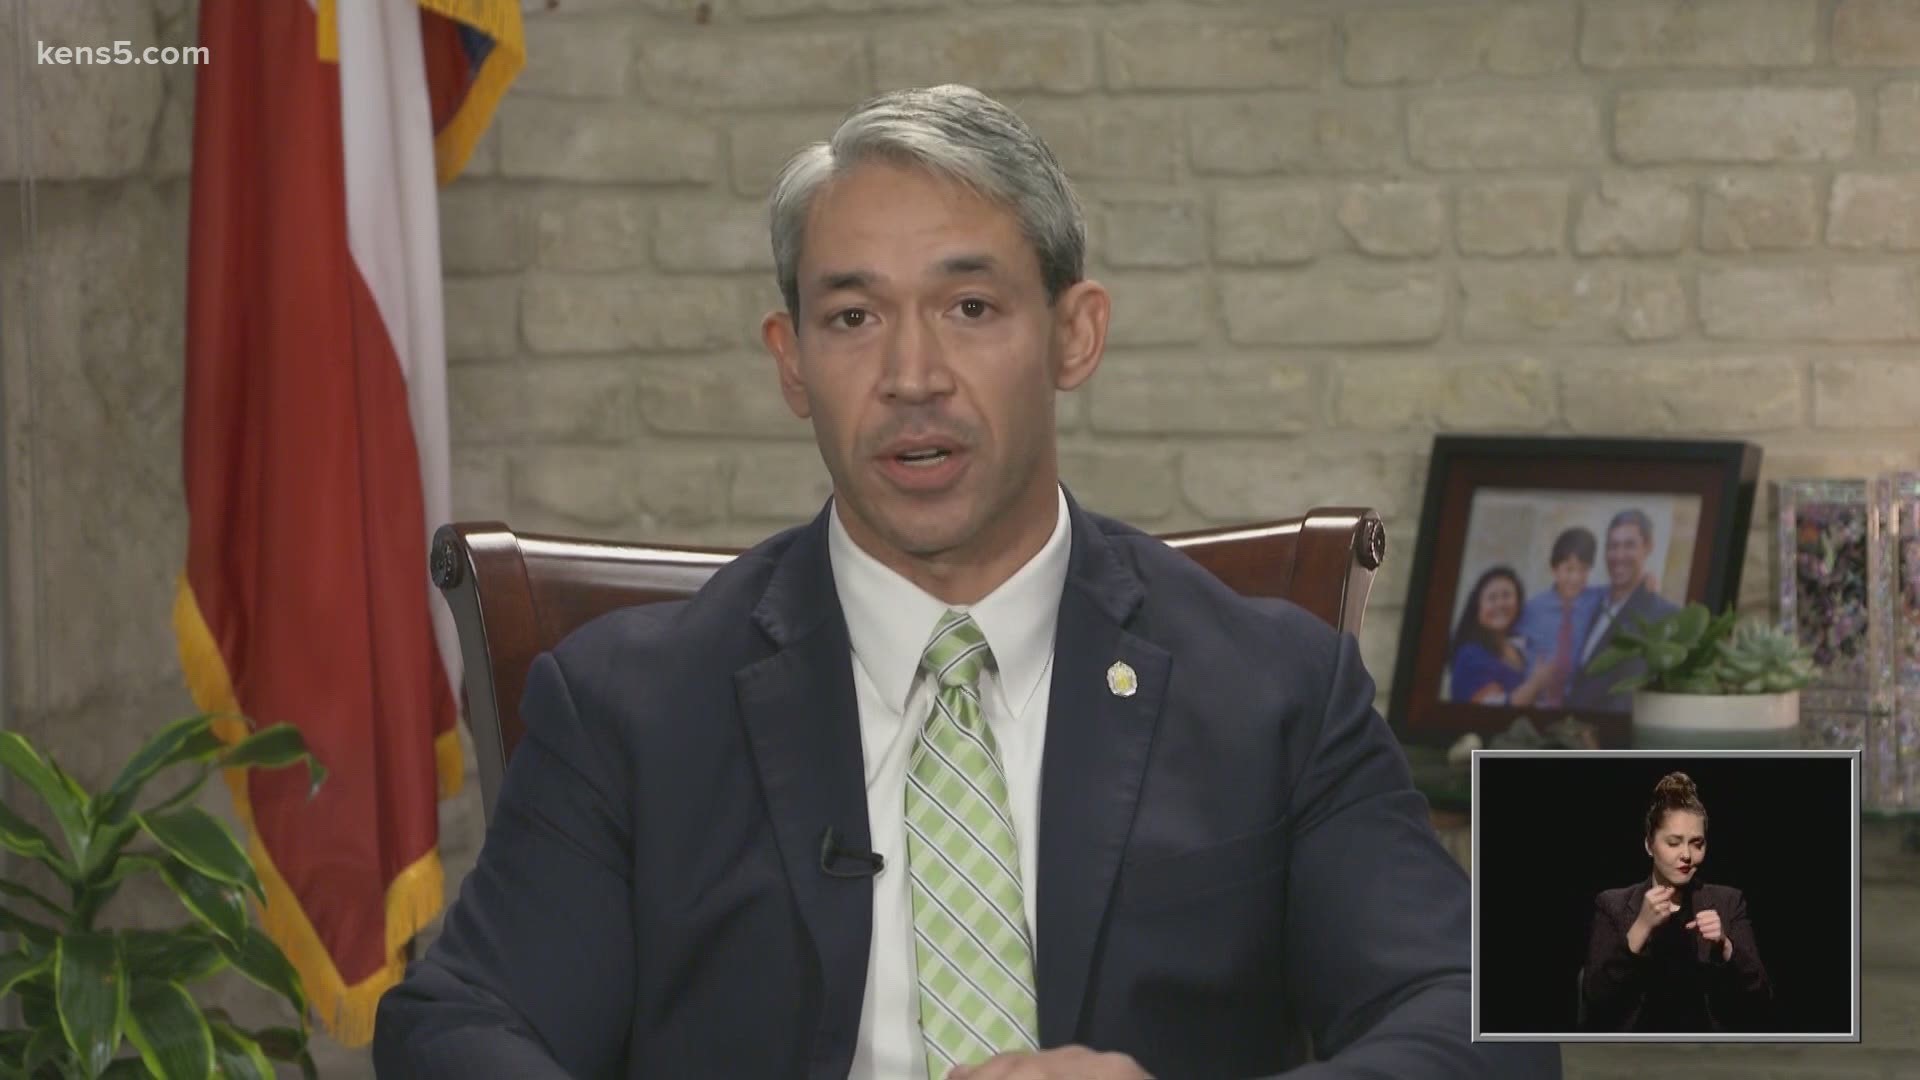 On Tuesday evening, Mayor Nirenberg discussed how the coronavirus has revealed inequalities in the metro, and how the pandemic has put planned projects on hold.